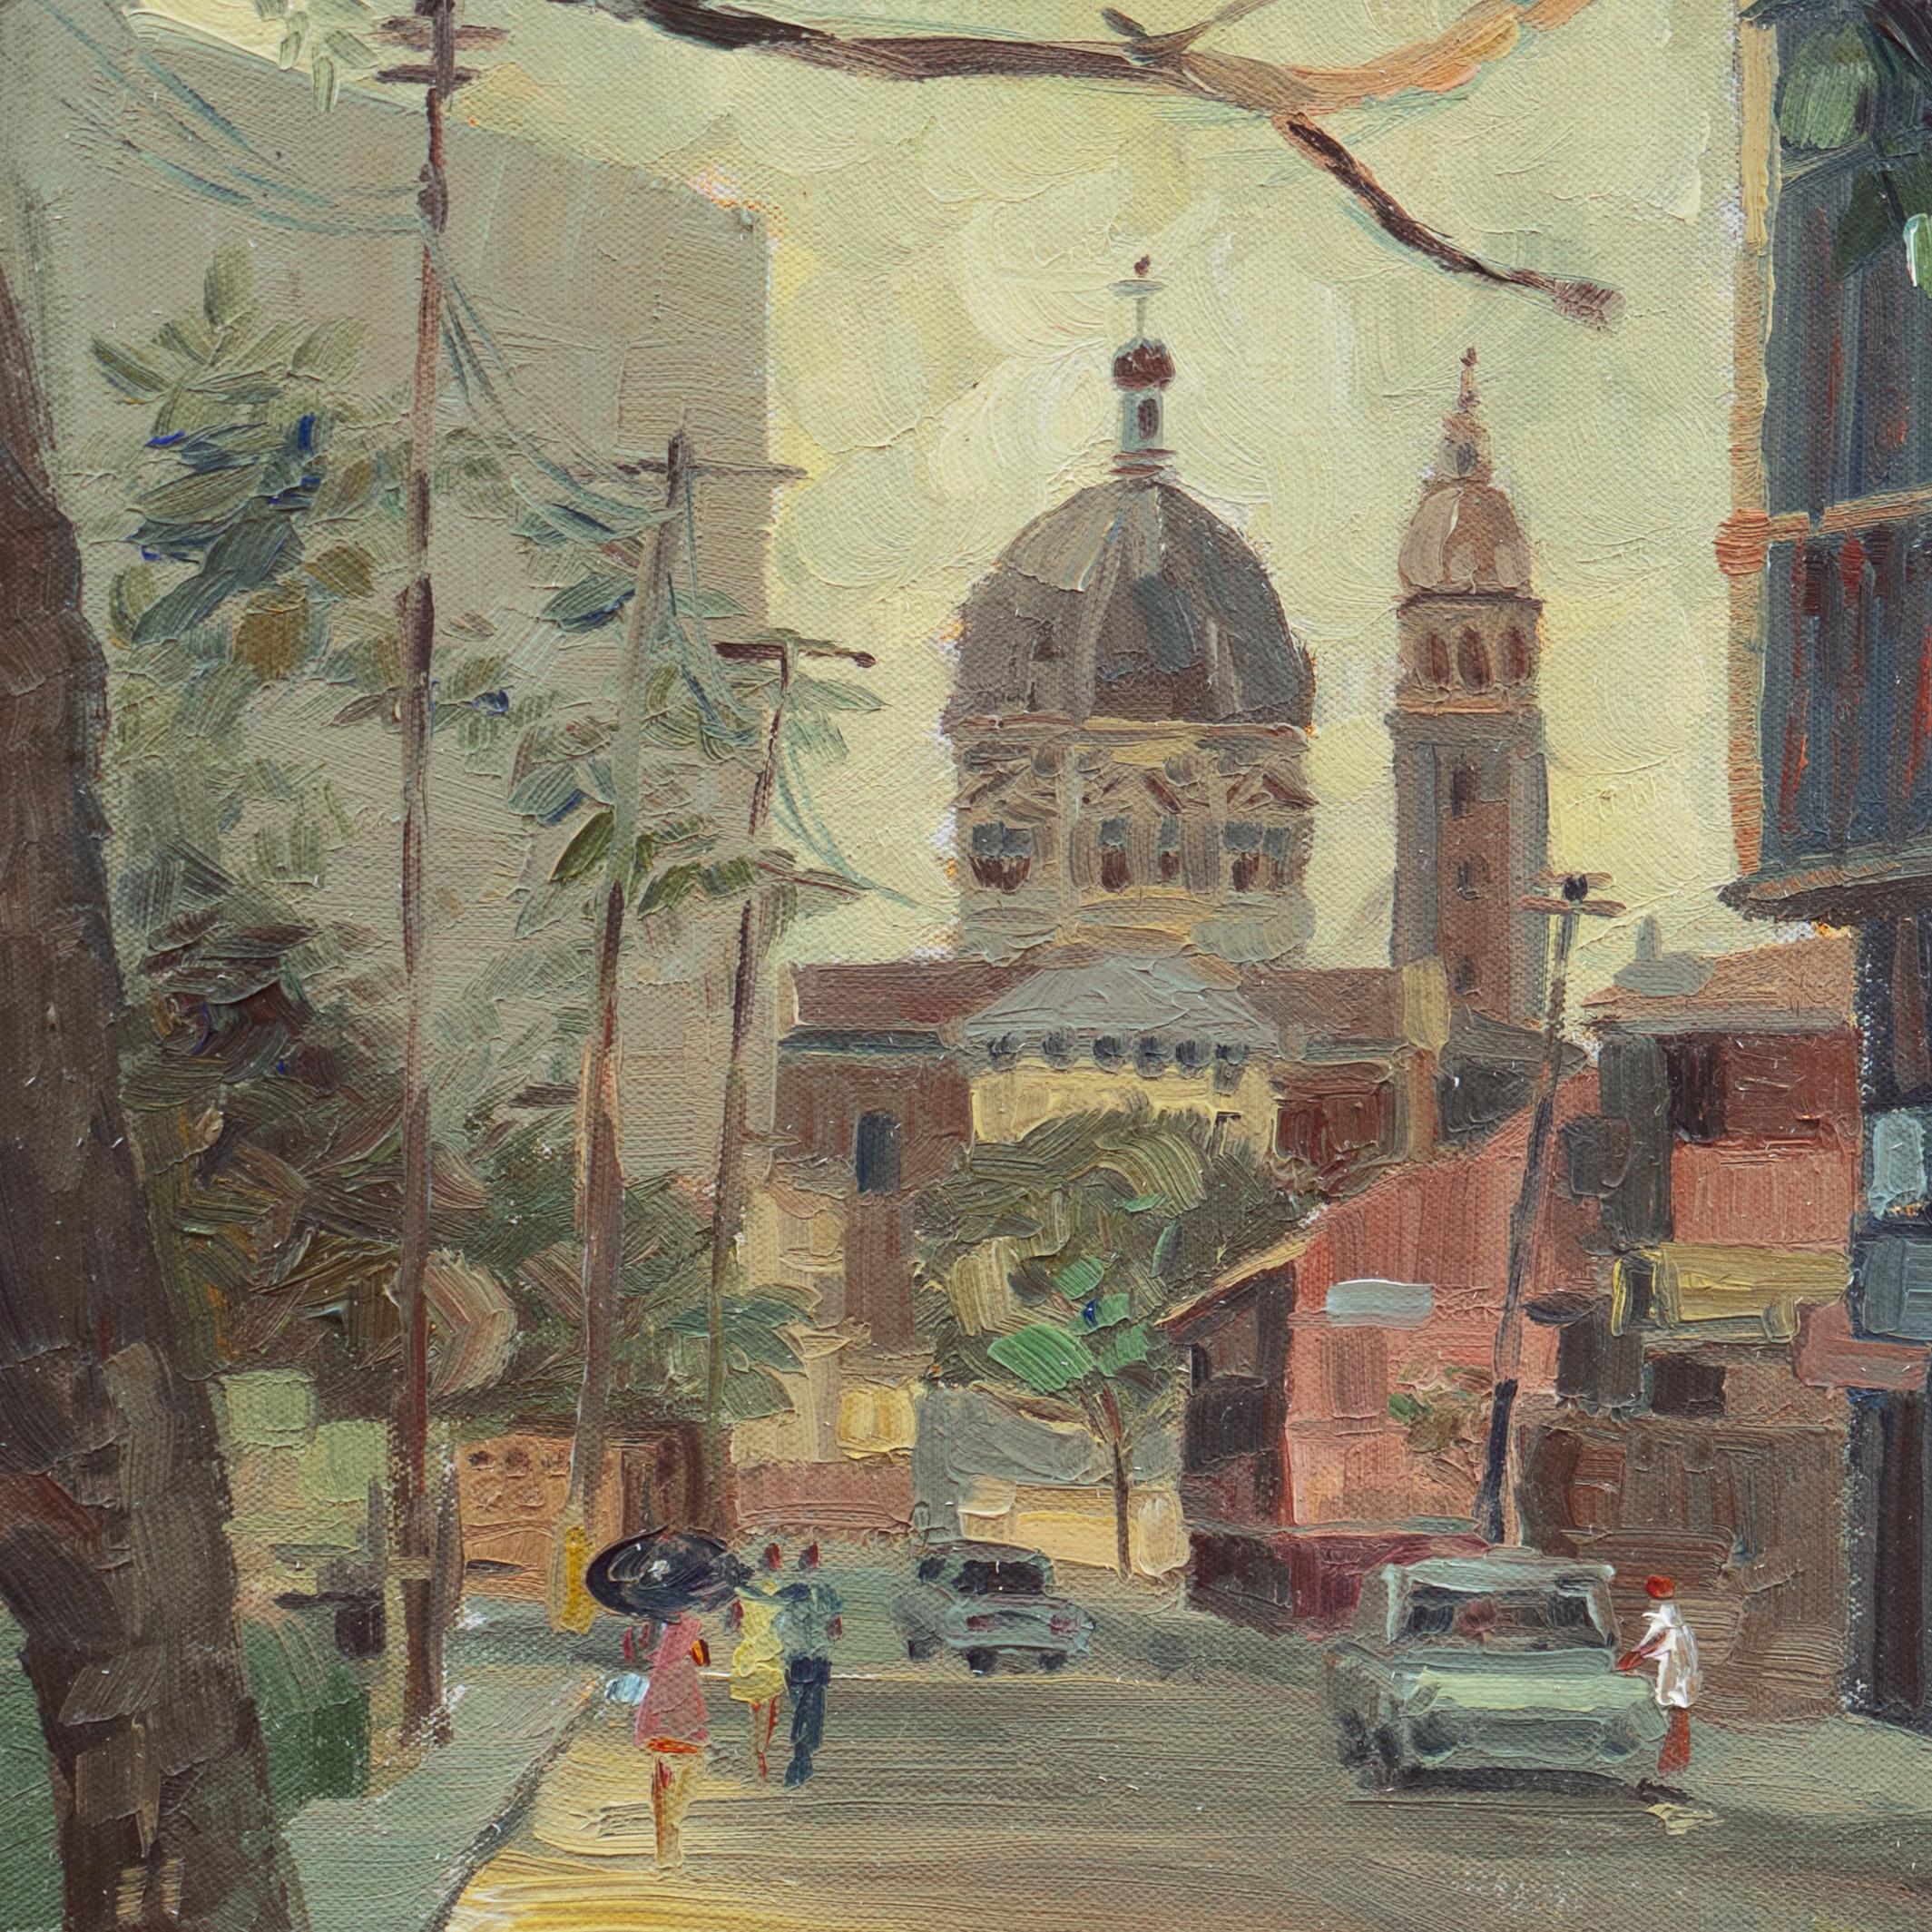 Signed lower right indistinctly, ( A.B. Delarova? ) and dated, '68''. Inscribed verso, 'Manila, Cathedral of the Immaculate Conception viewed from General Luna Street'.

A deftly-painted, tonalist oil painting showing of this elegant section of